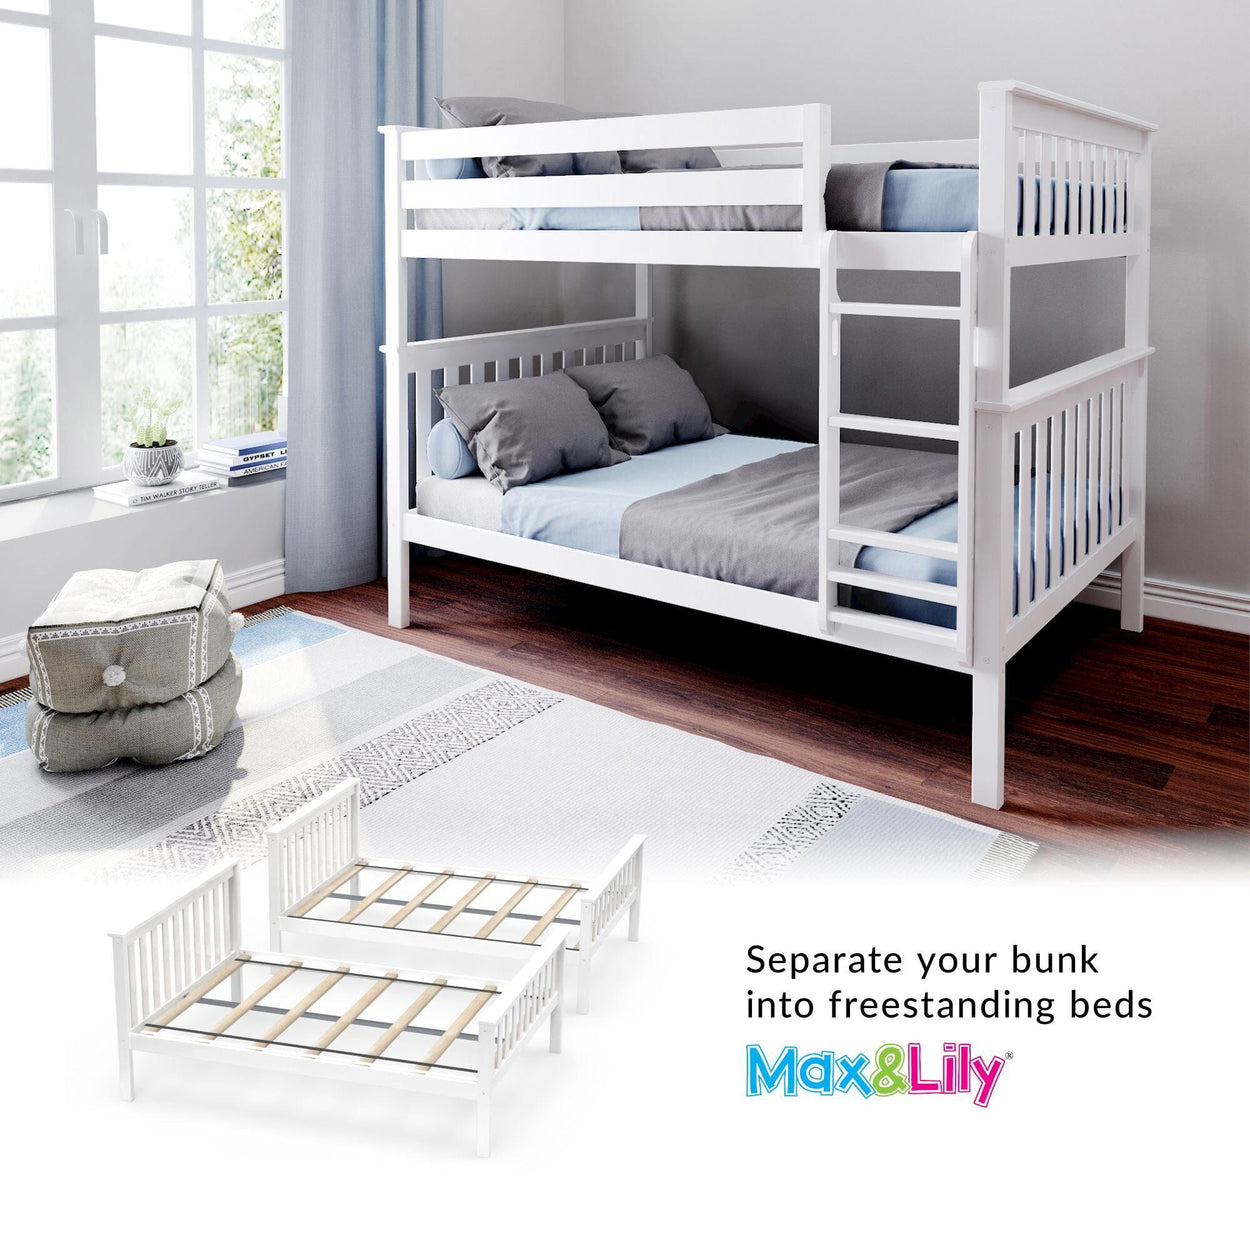 180251-002 : Bunk Beds Full over Full Bunk Bed, White